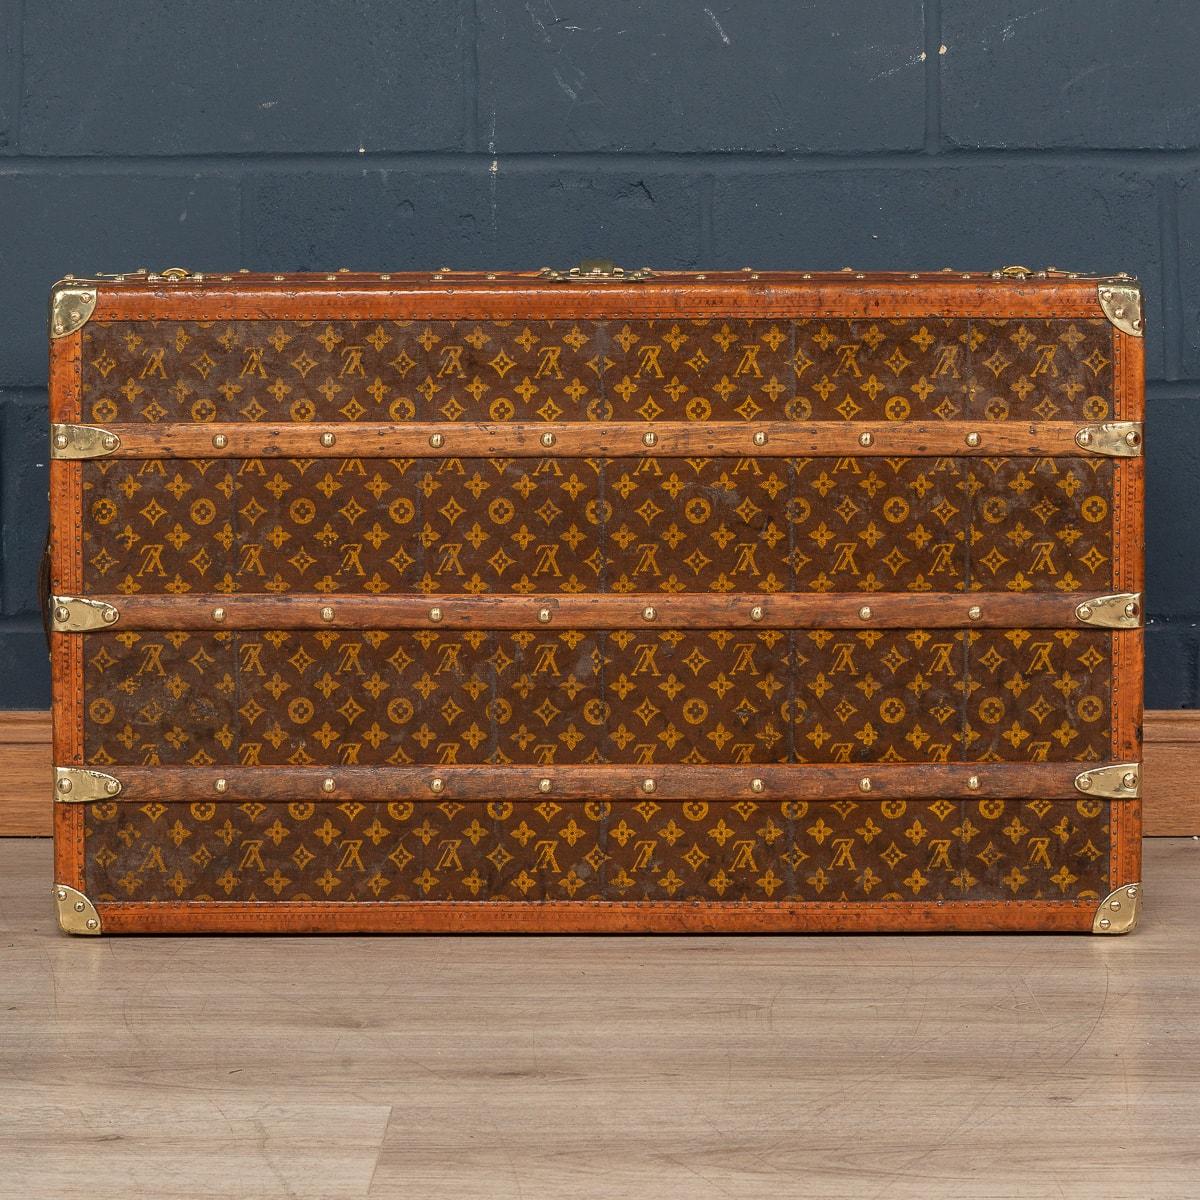 Leather 20th Century Louis Vuitton Cabin Trunk in Monogram Canvas, France, circa 1930